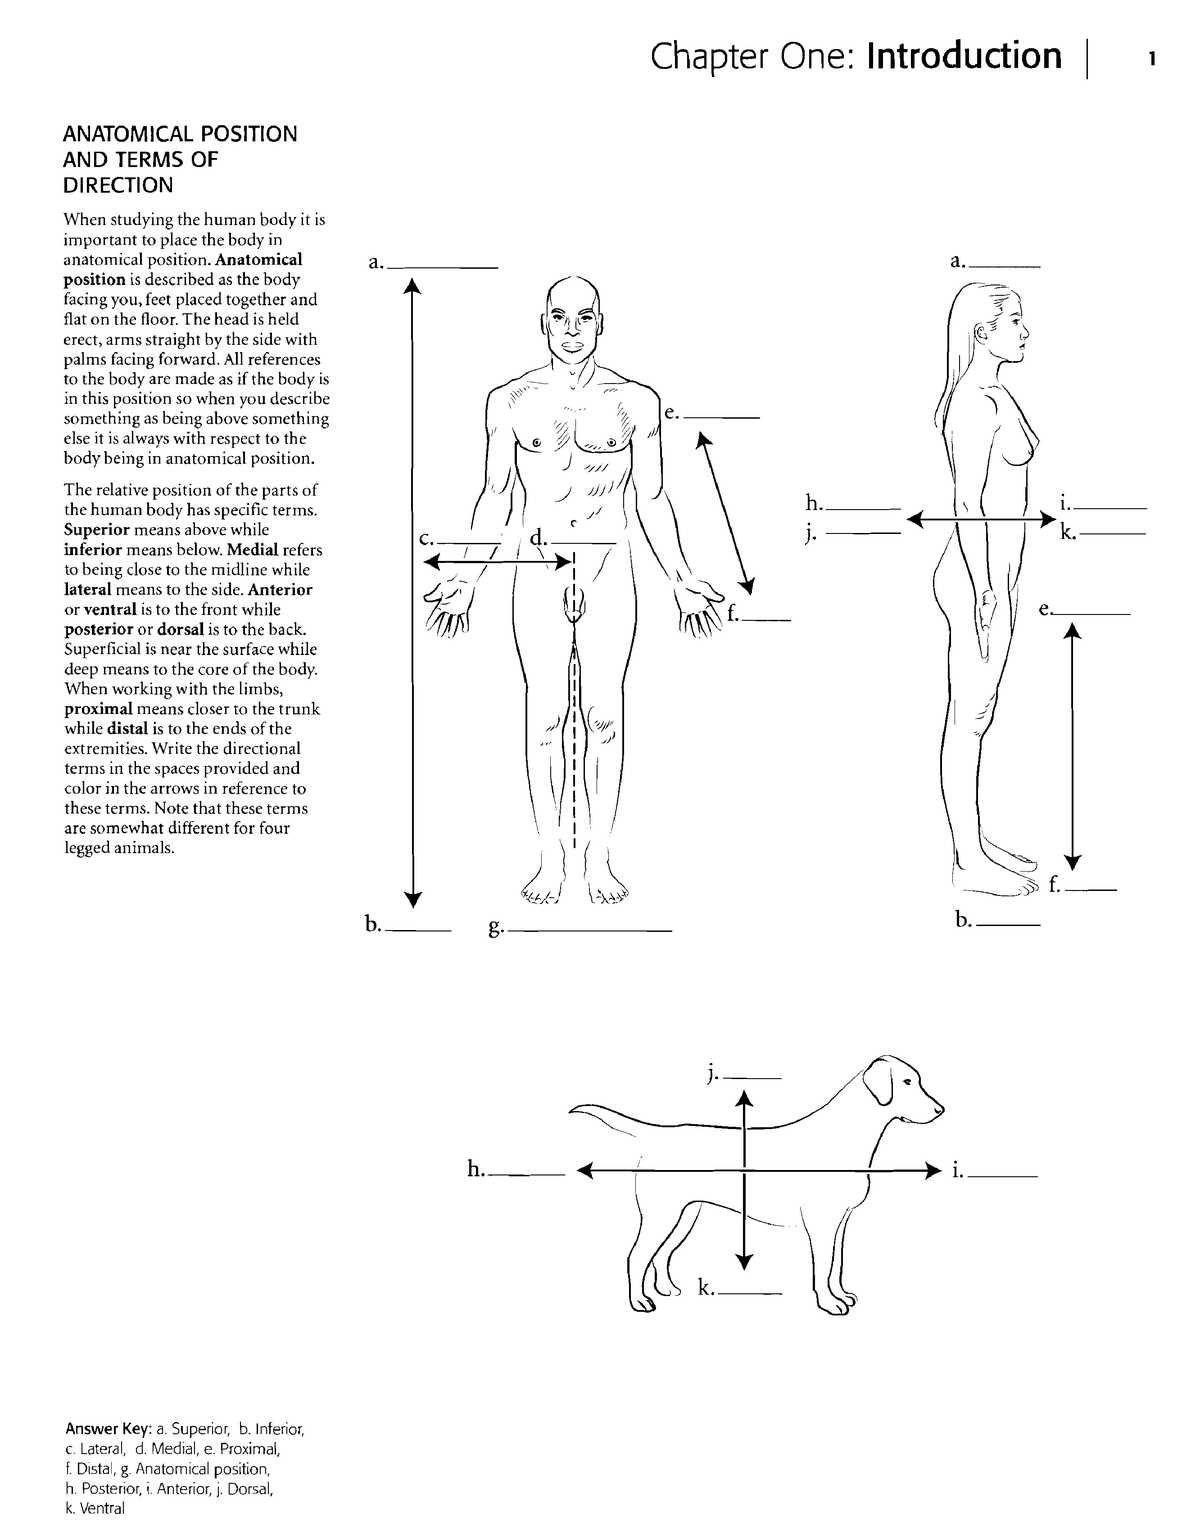 Homeostasis and Body Systems